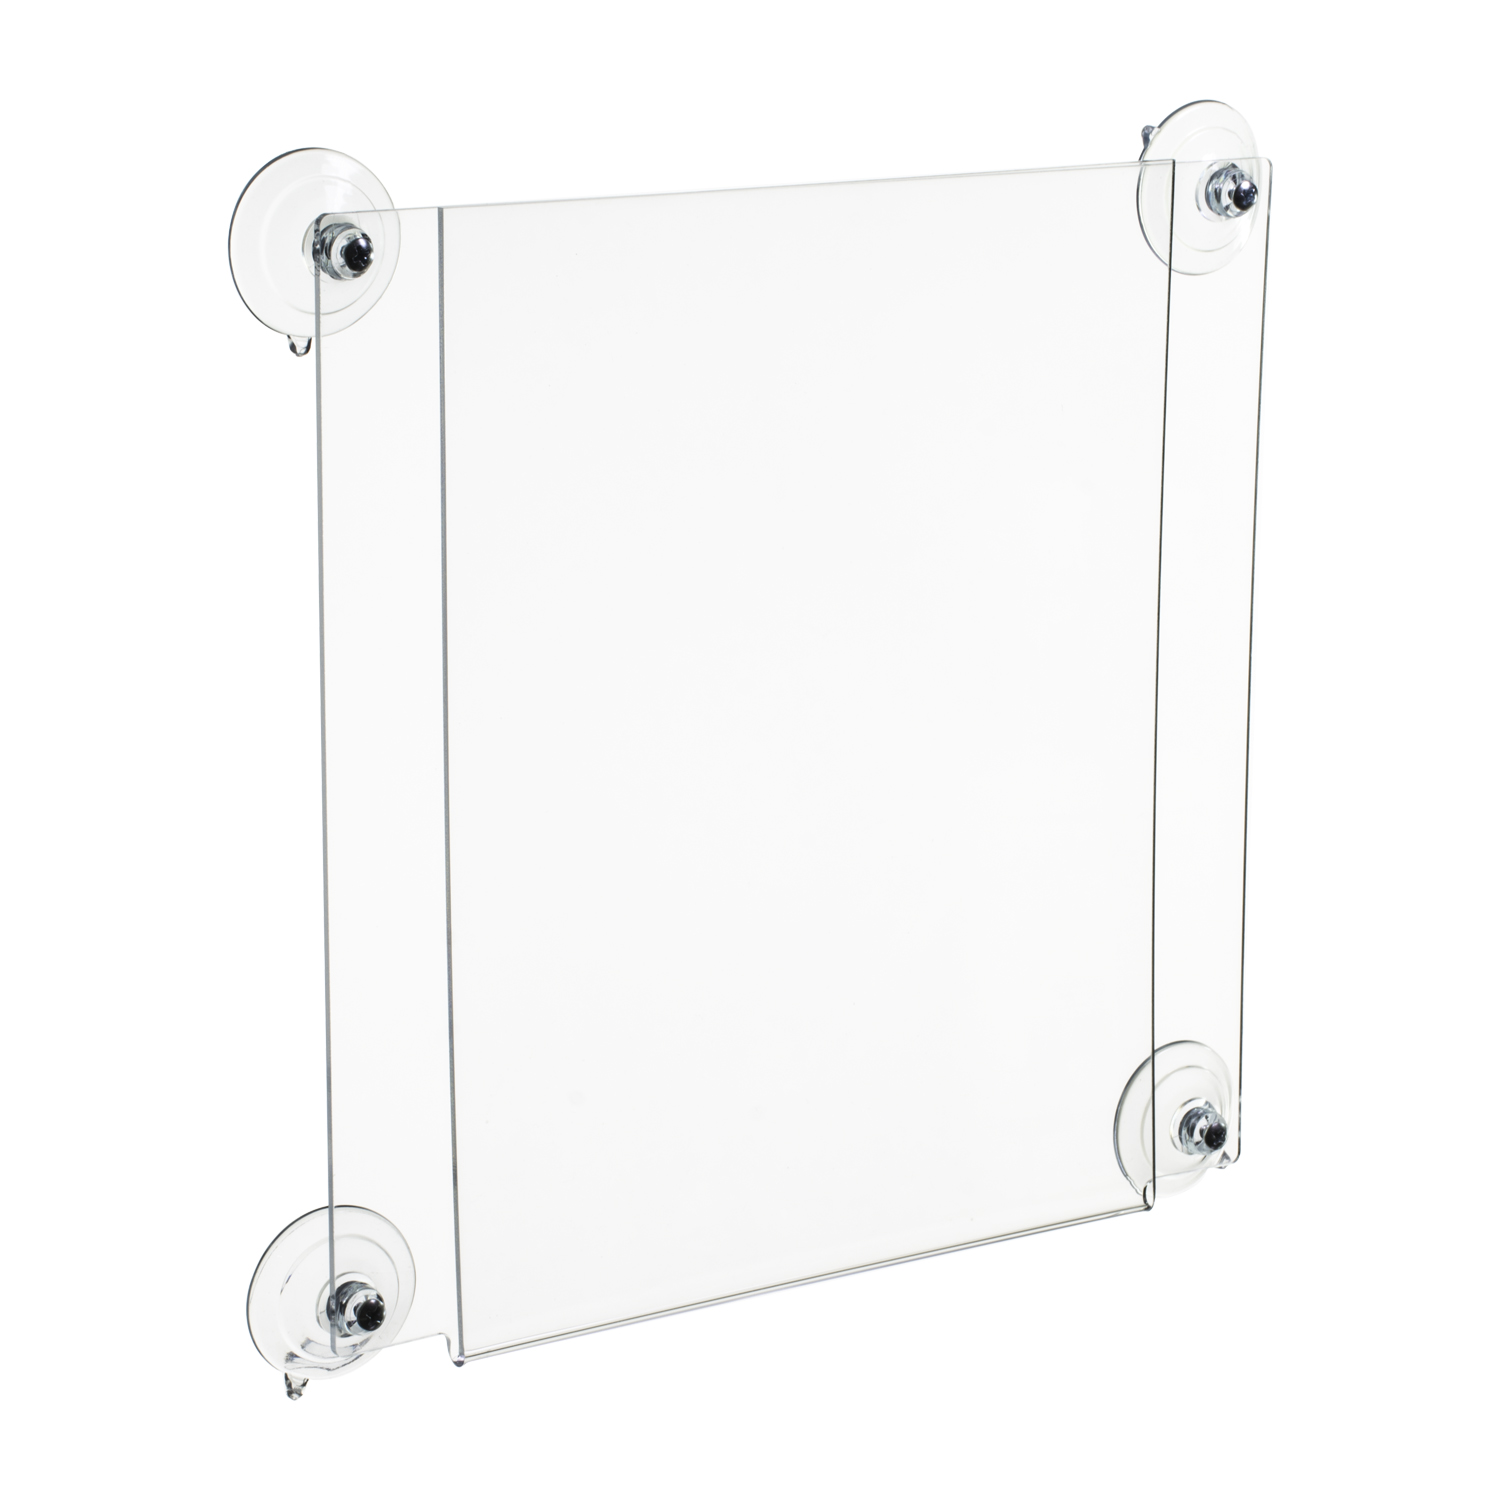 8.5 x 11 Acrylic Window Sign Holder with Suction Cups